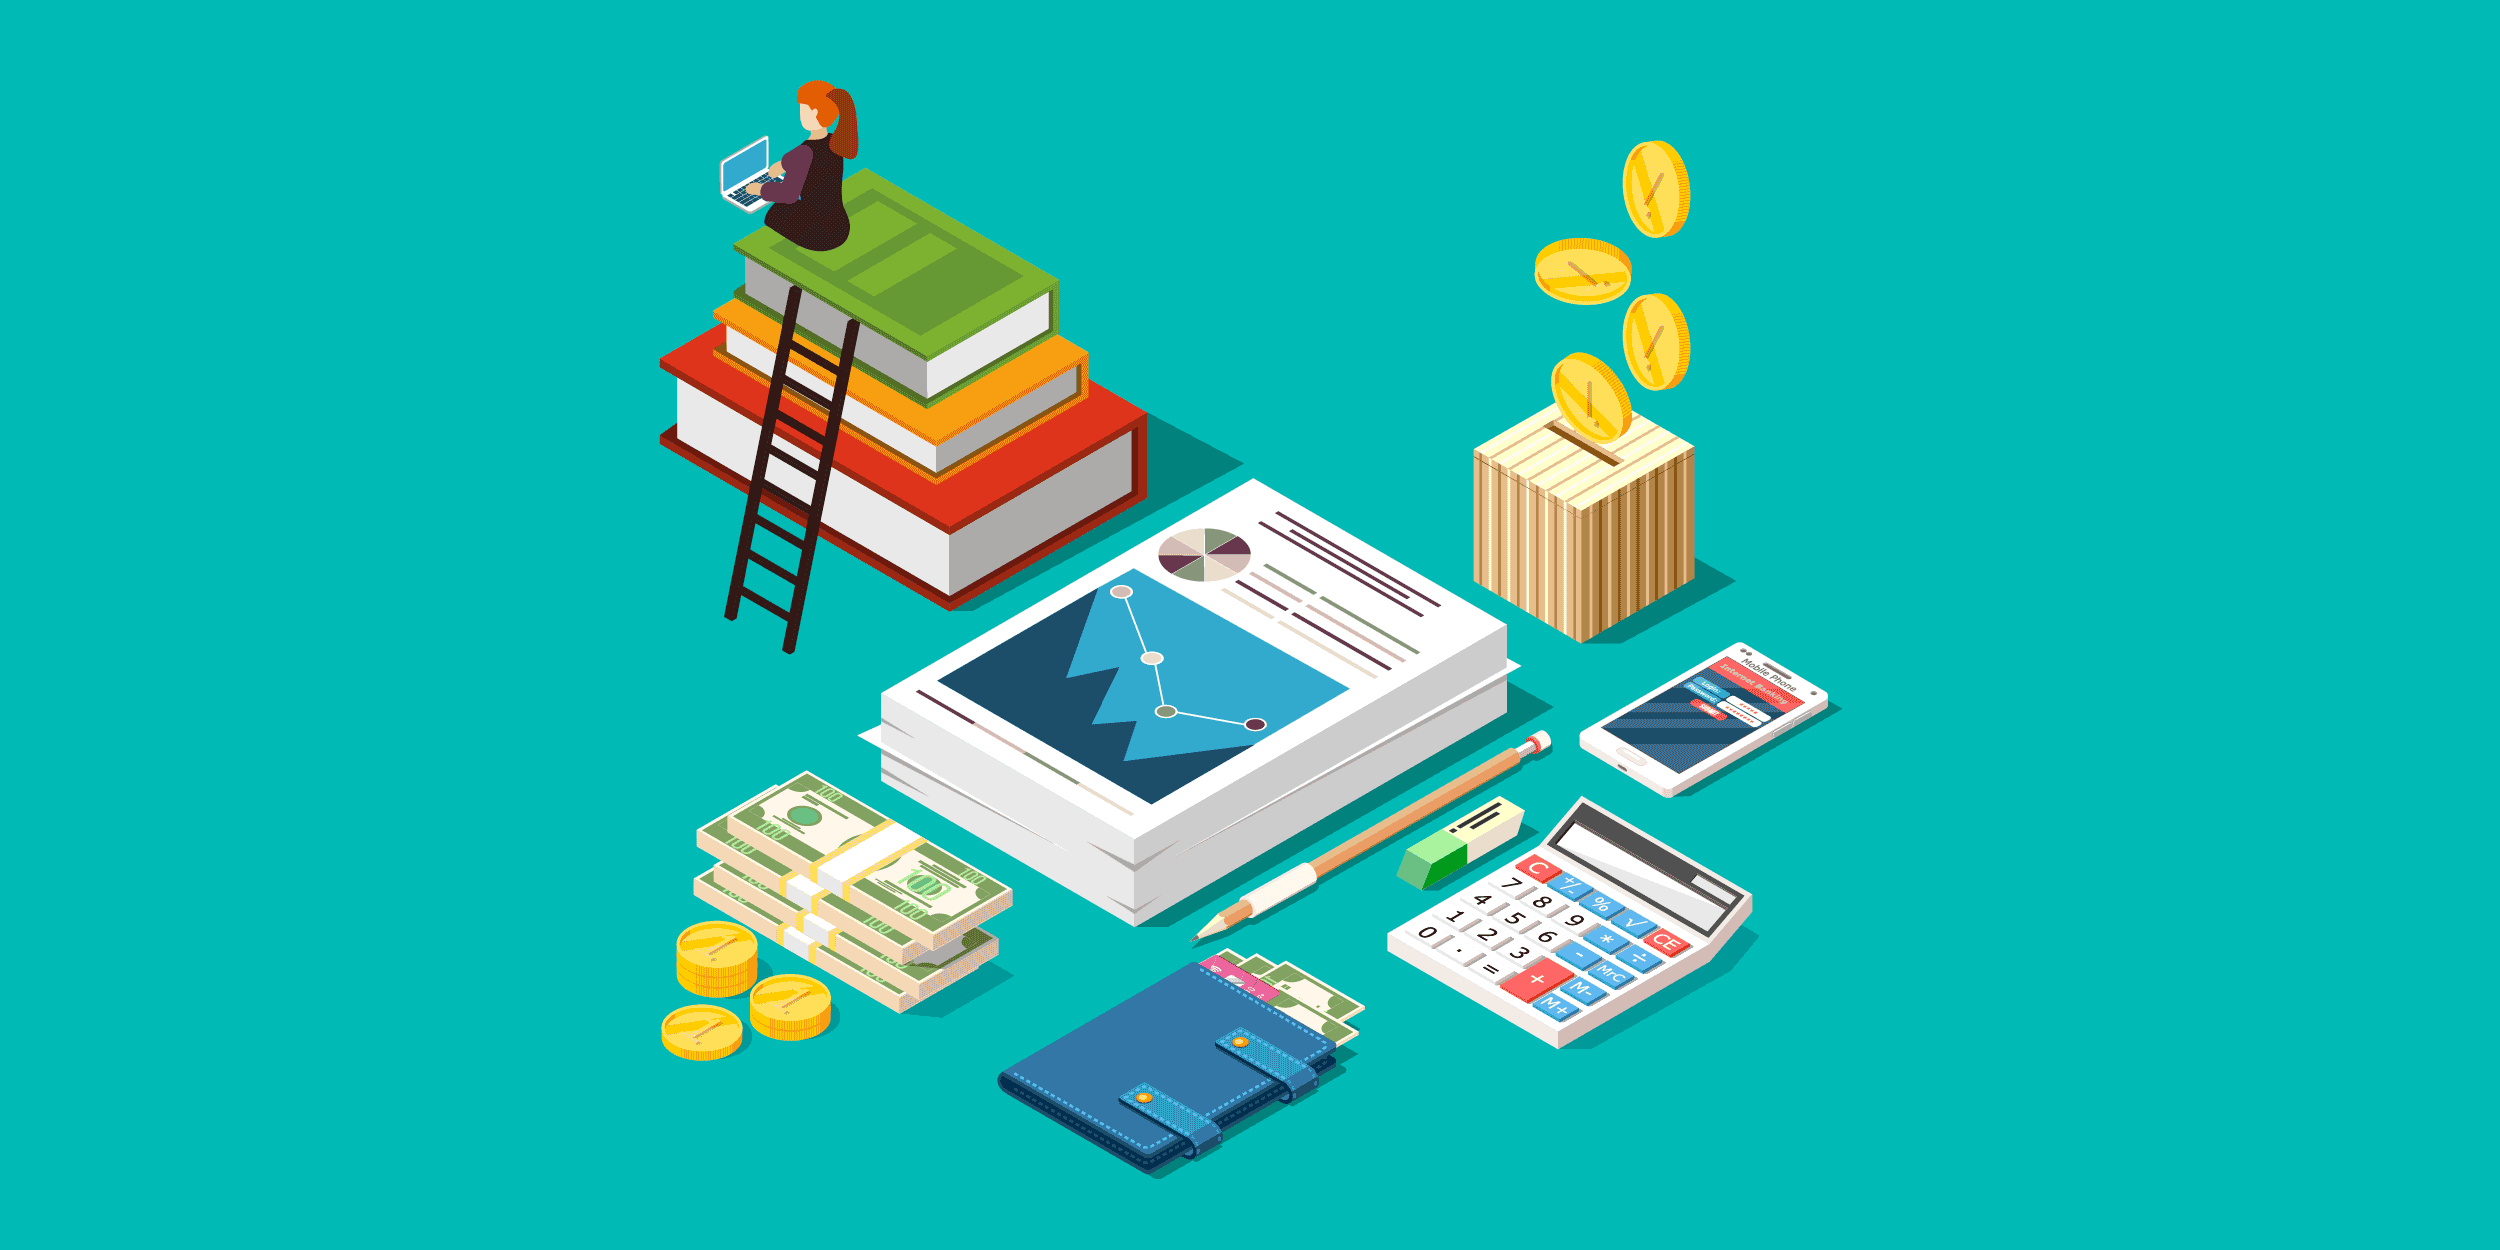 an illustration of a woman sitting on a stack of books working on nonprofit accounting, next to reports, cash, credit cards, a calculator, a piggy bank, a phone, a pencil, and an eraser